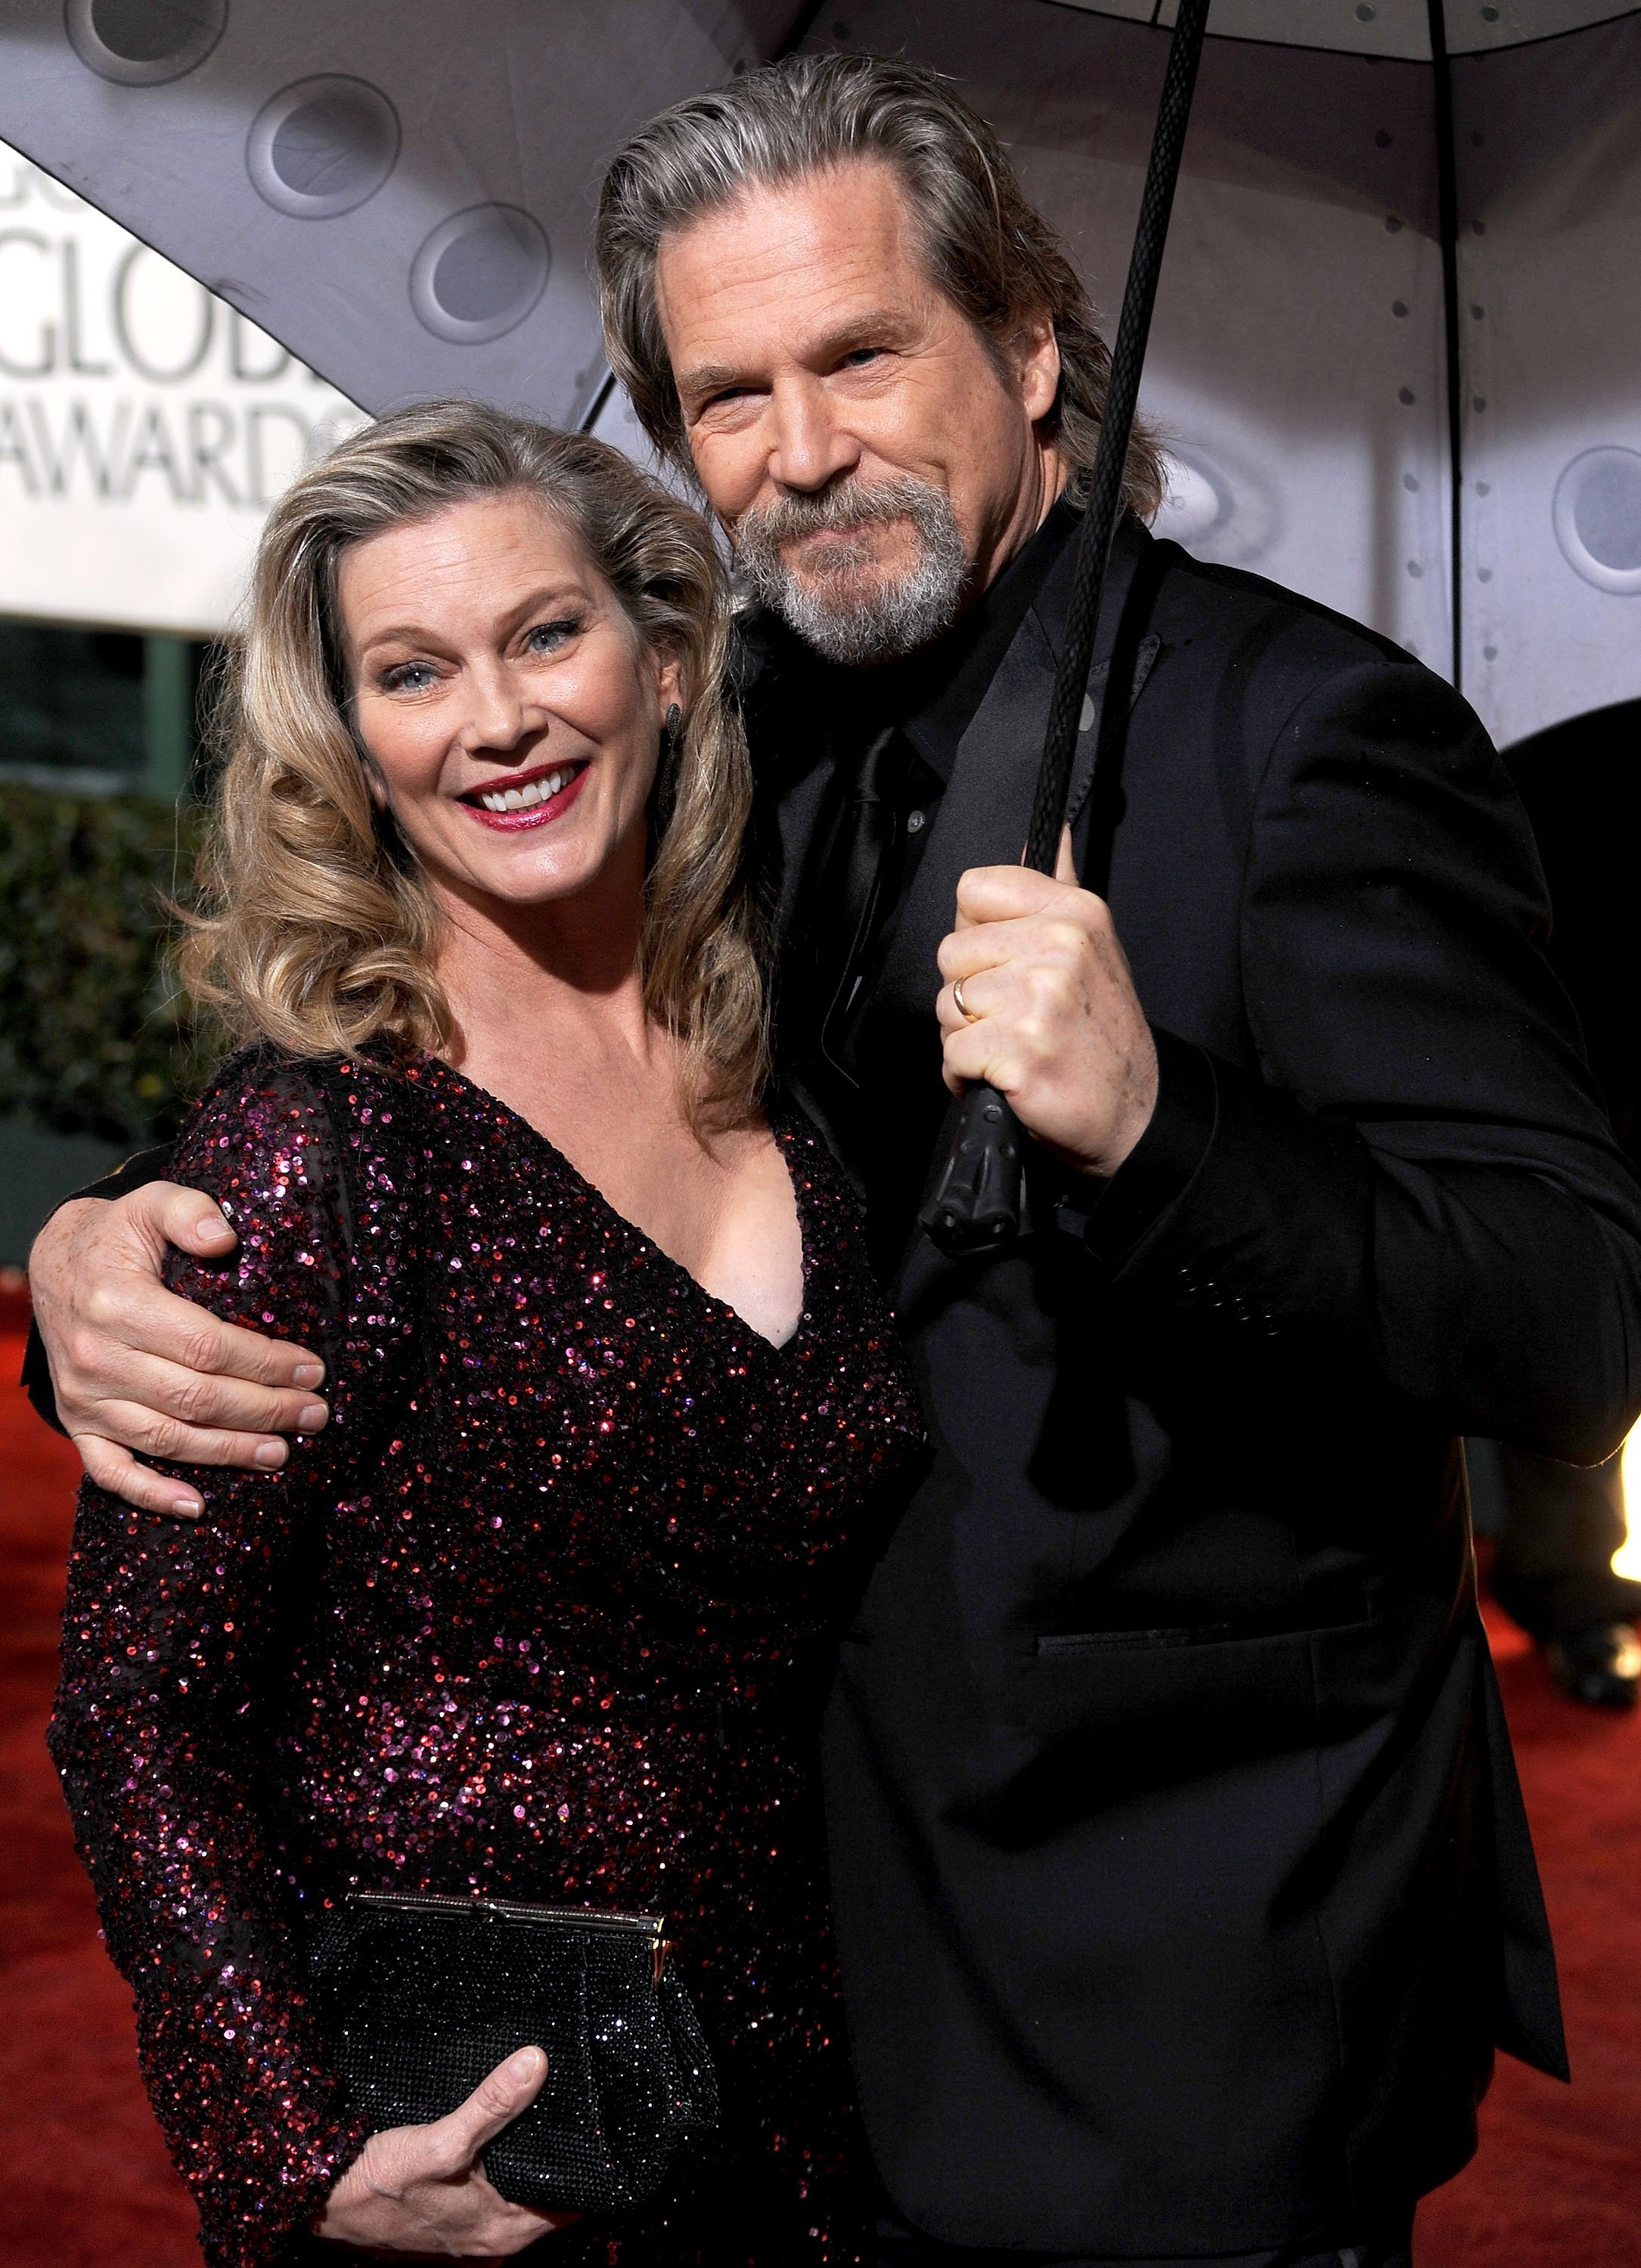 Susan Geston and actor Jeff Bridges arrive at the 67th Annual Golden Globe Awards on January 17, 2010. | Photo: Getty Images